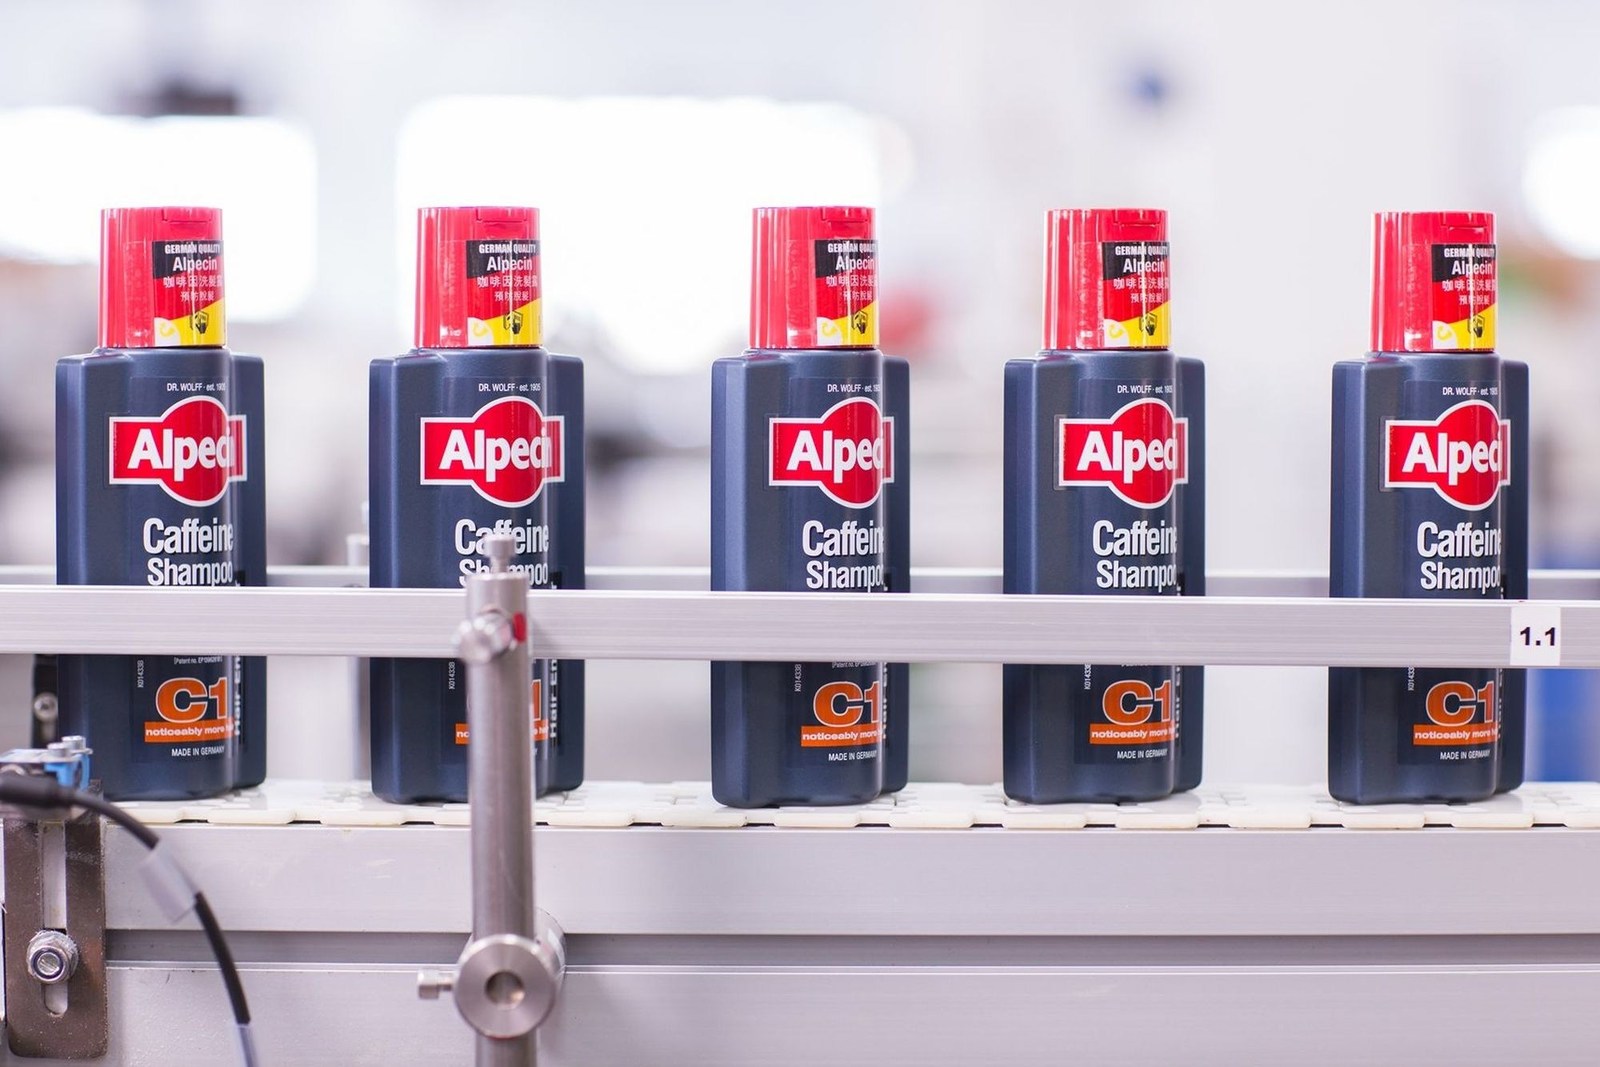 Production of Alpecin caffeine shampoo in Germany with Asian label (PRNewsFoto/Dr. Wolff Group)